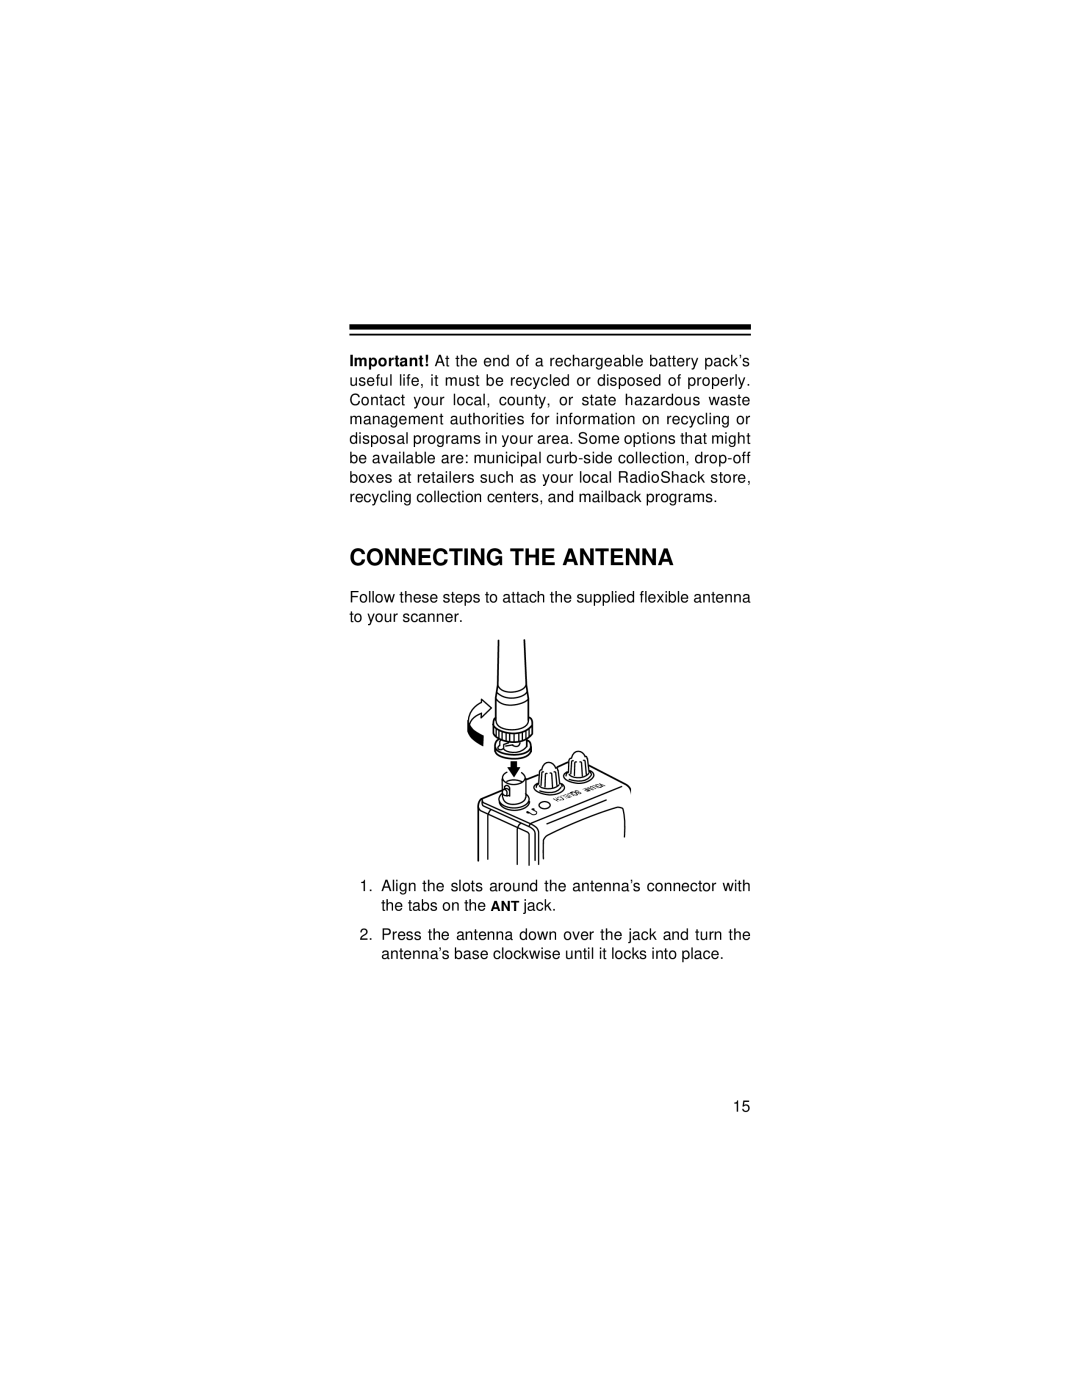 Radio Shack PRO-72 owner manual Connecting the Antenna 